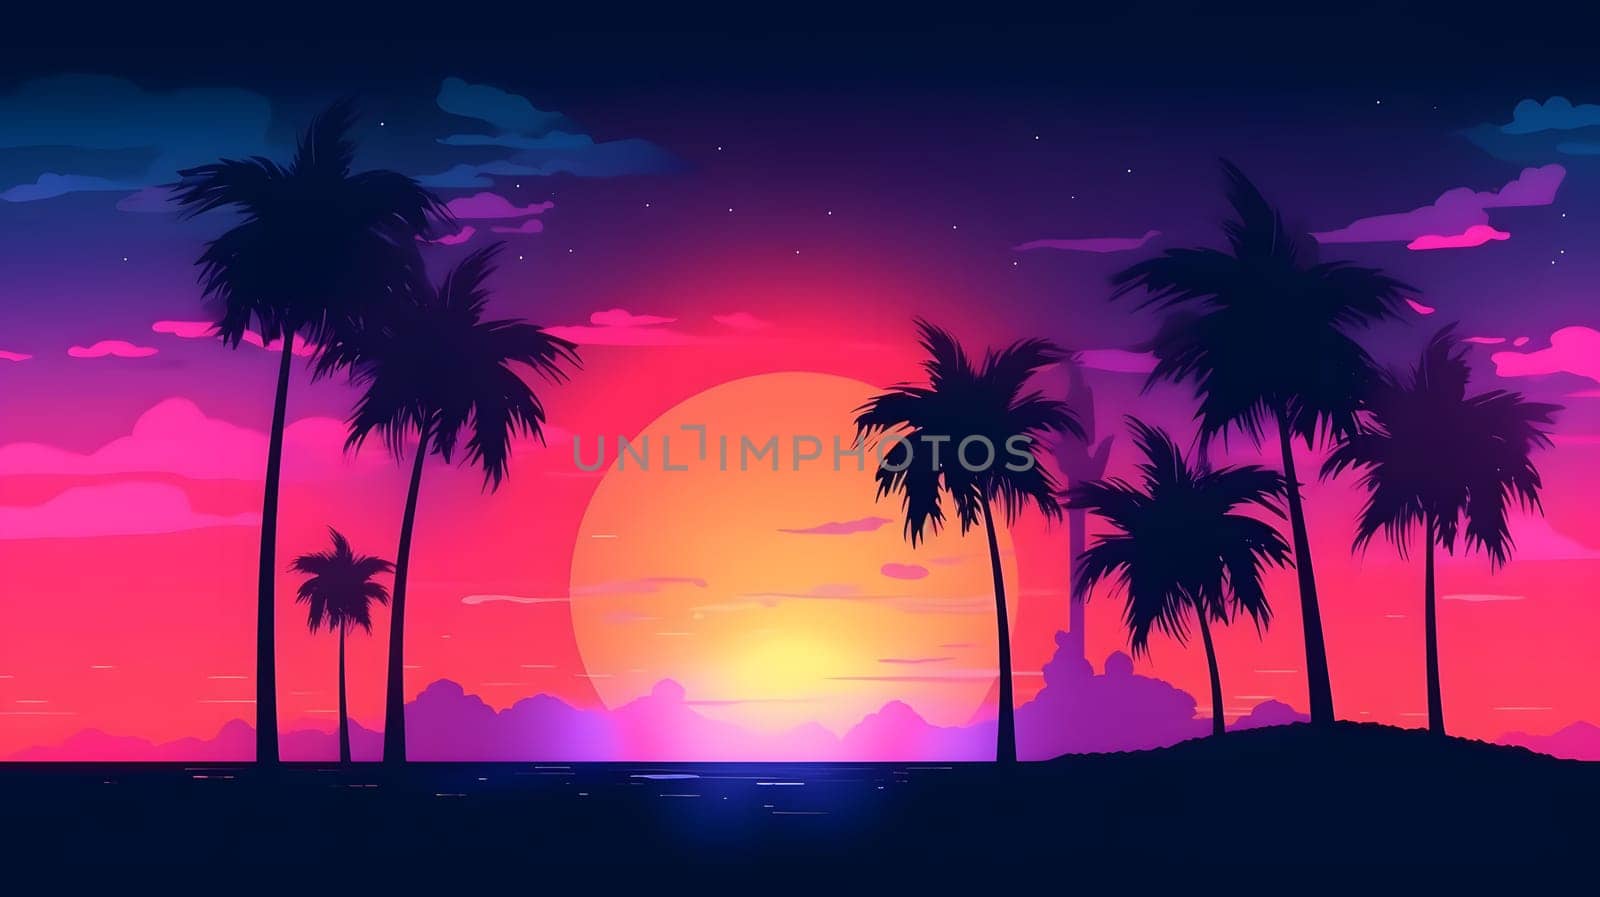 generic low-fi synthvawe gradient sunset landscape with palm trees silhouettes in neon colors, neural network generated image by z1b